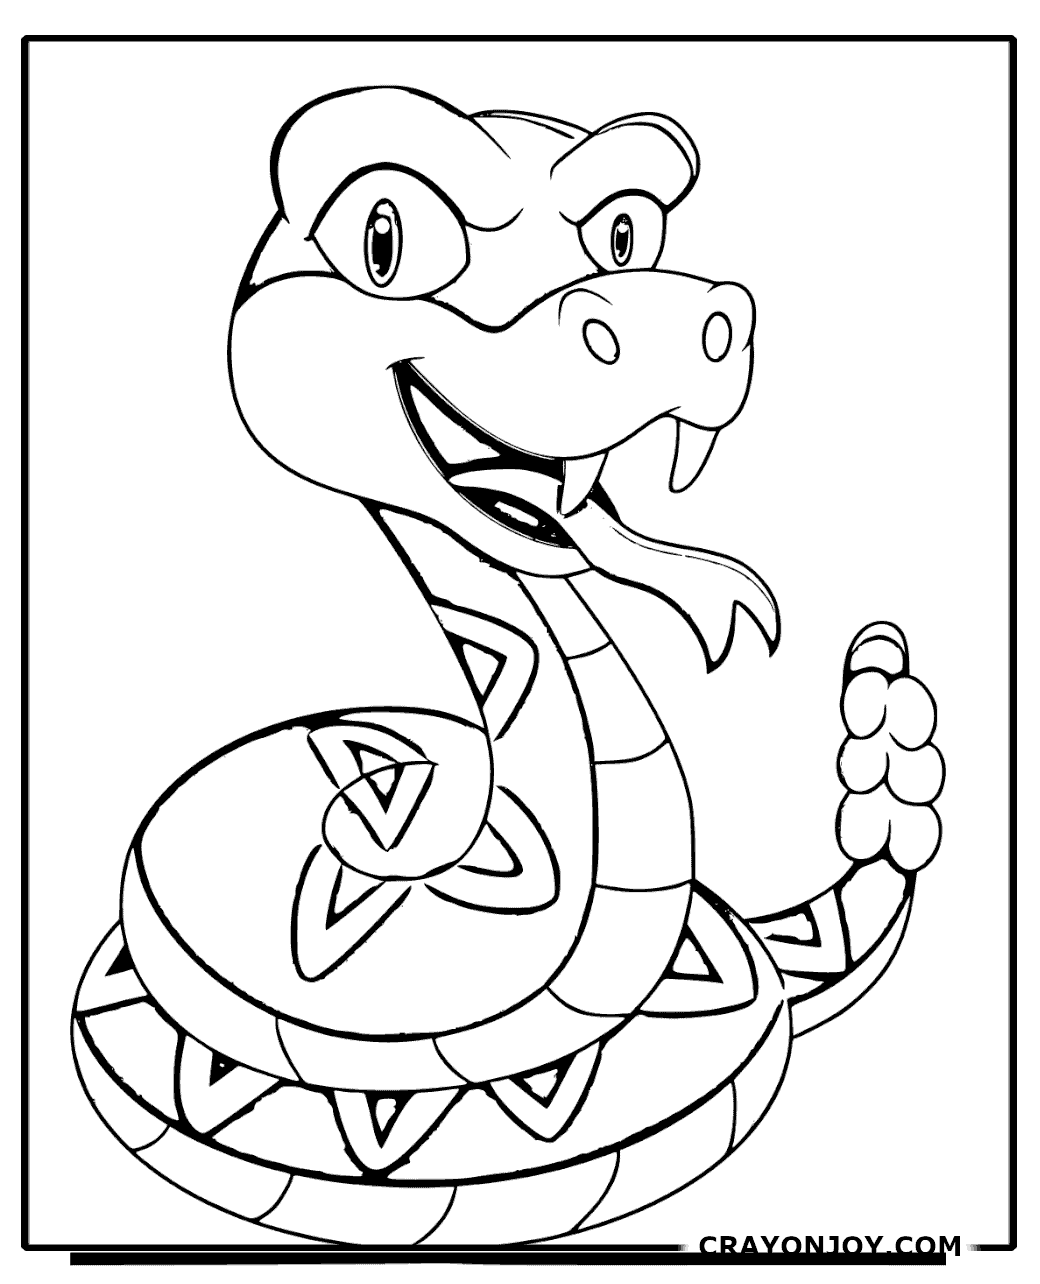 Free Printable Rattlesnake Coloring Pages